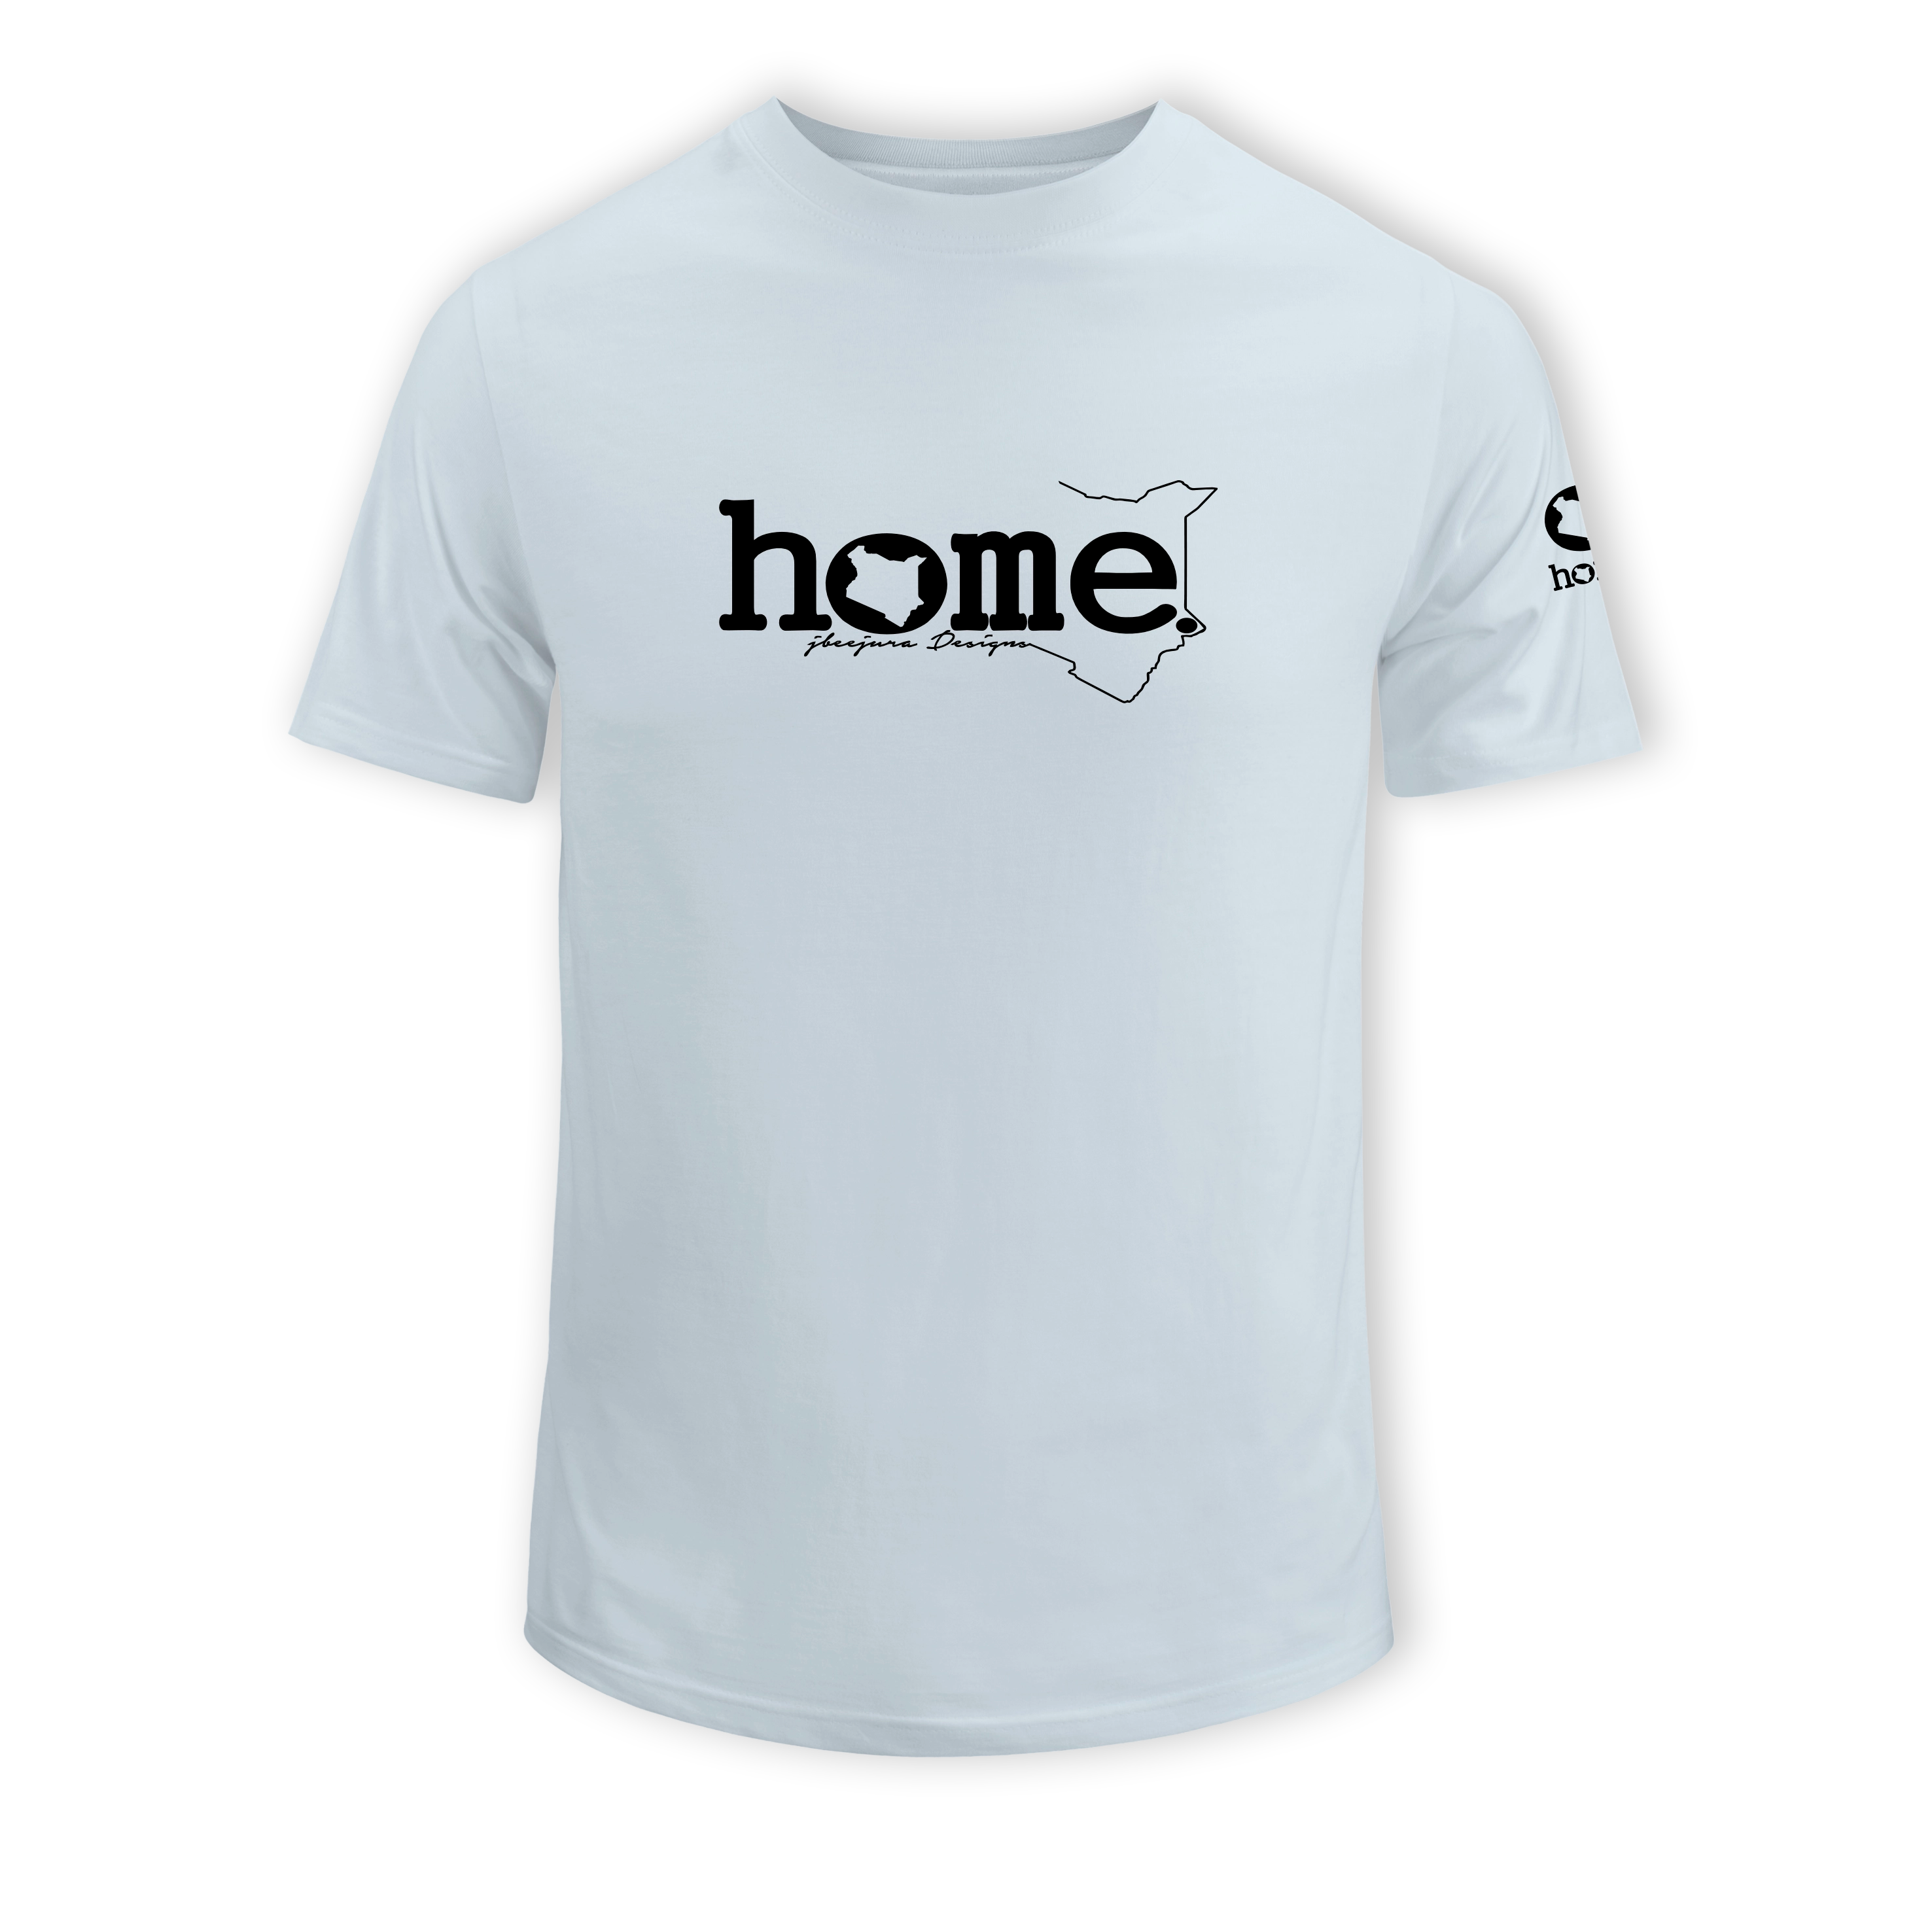 home_254 KIDS SHORT-SLEEVED SKY BLUE T-SHIRT WITH A BLACK CLASSIC WORDS PRINT – COTTON PLUS FABRIC